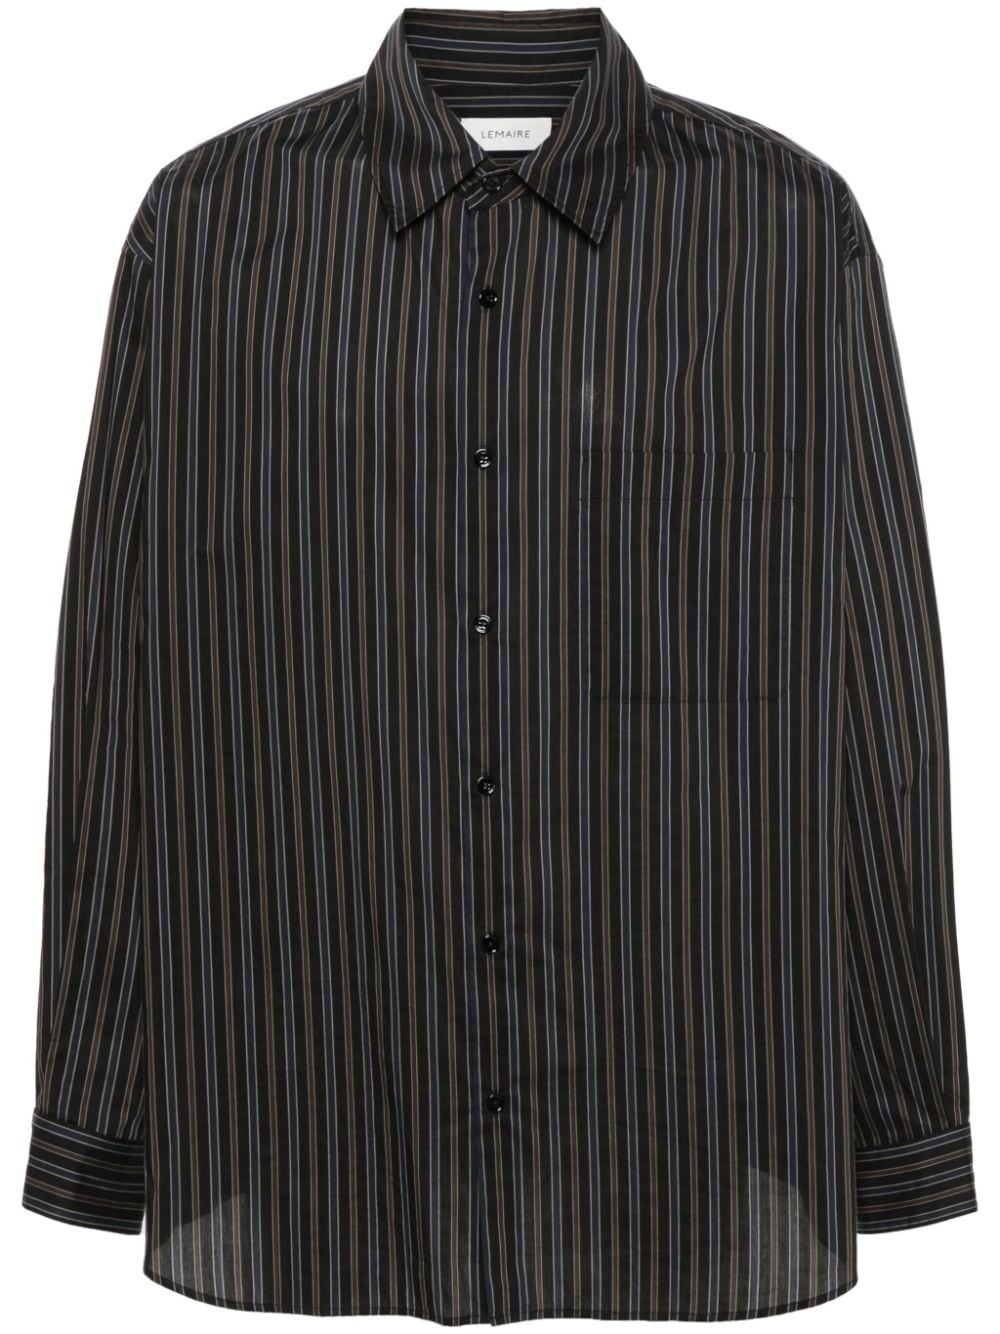 LEMAIRE long-sleeved striped shirt - Brown von LEMAIRE